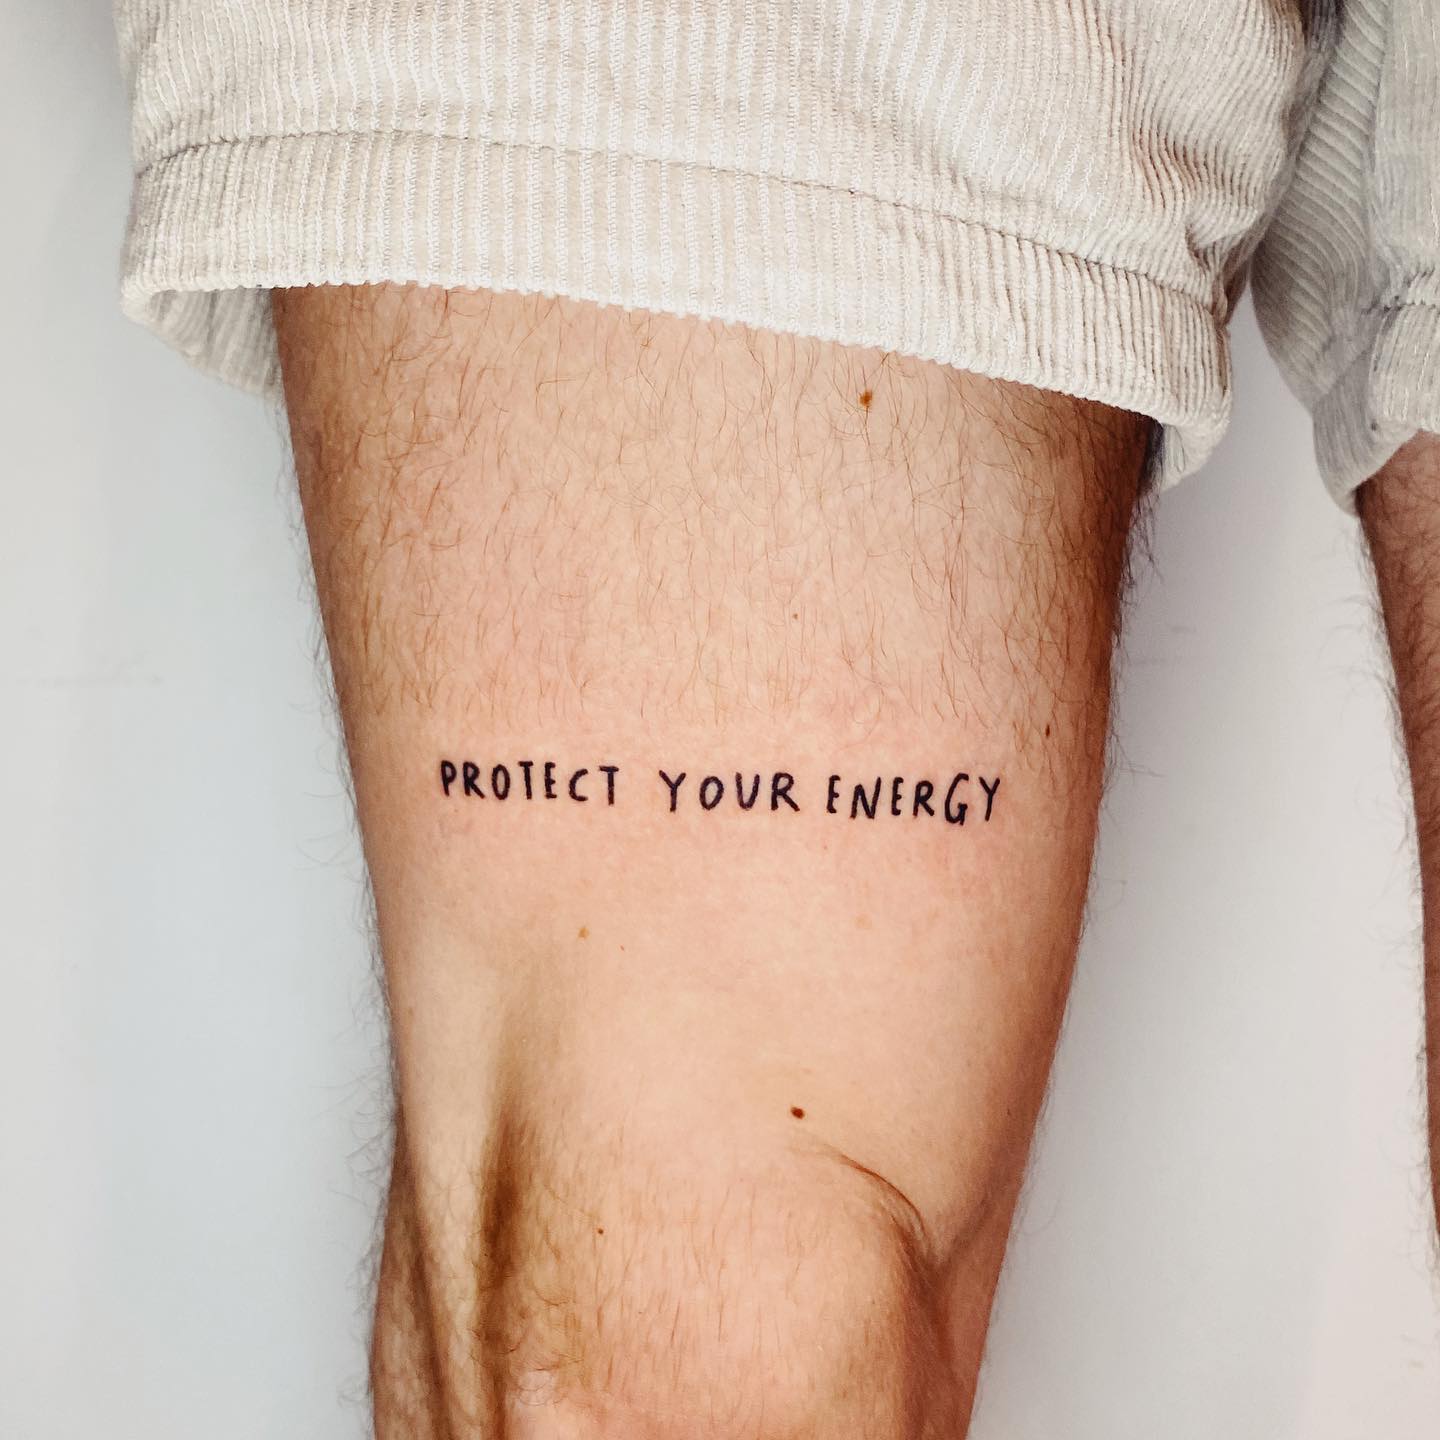 Tattoo uploaded by Paige  Thigh quote fineline quote thightattoo   Tattoodo